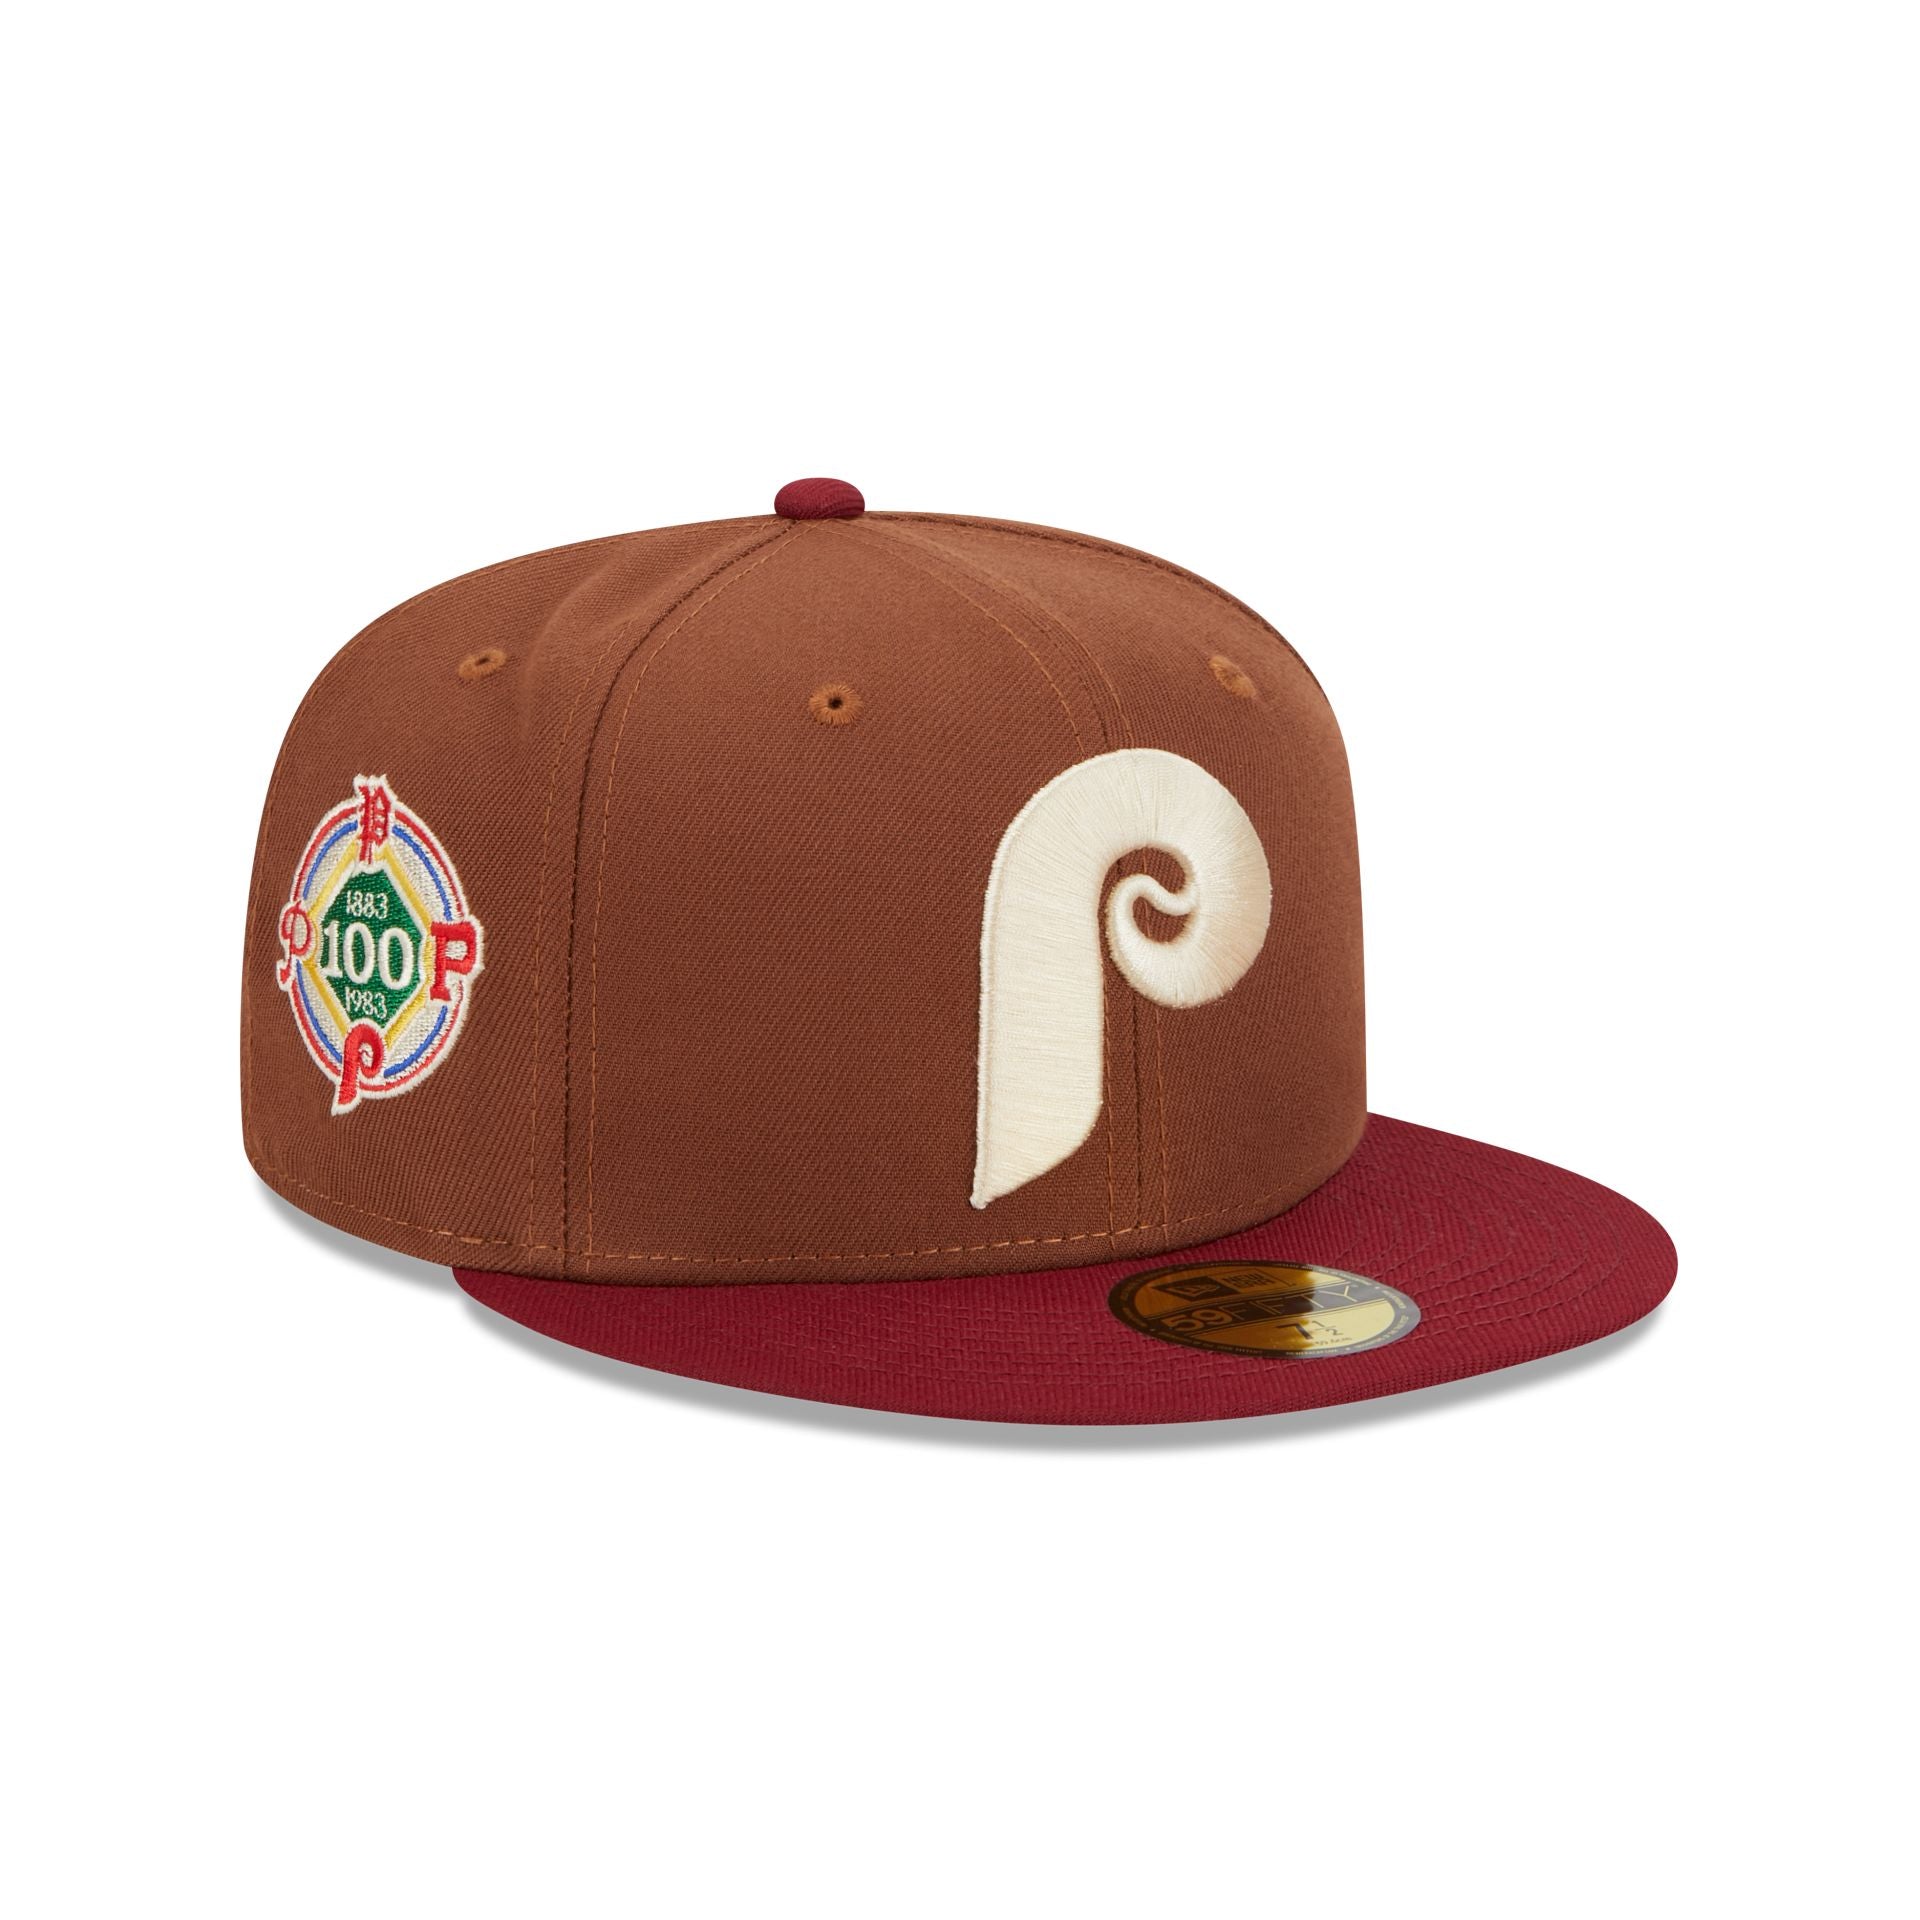 New Era Harvest 9Forty Pittsburgh Pirates - 48h Delivery